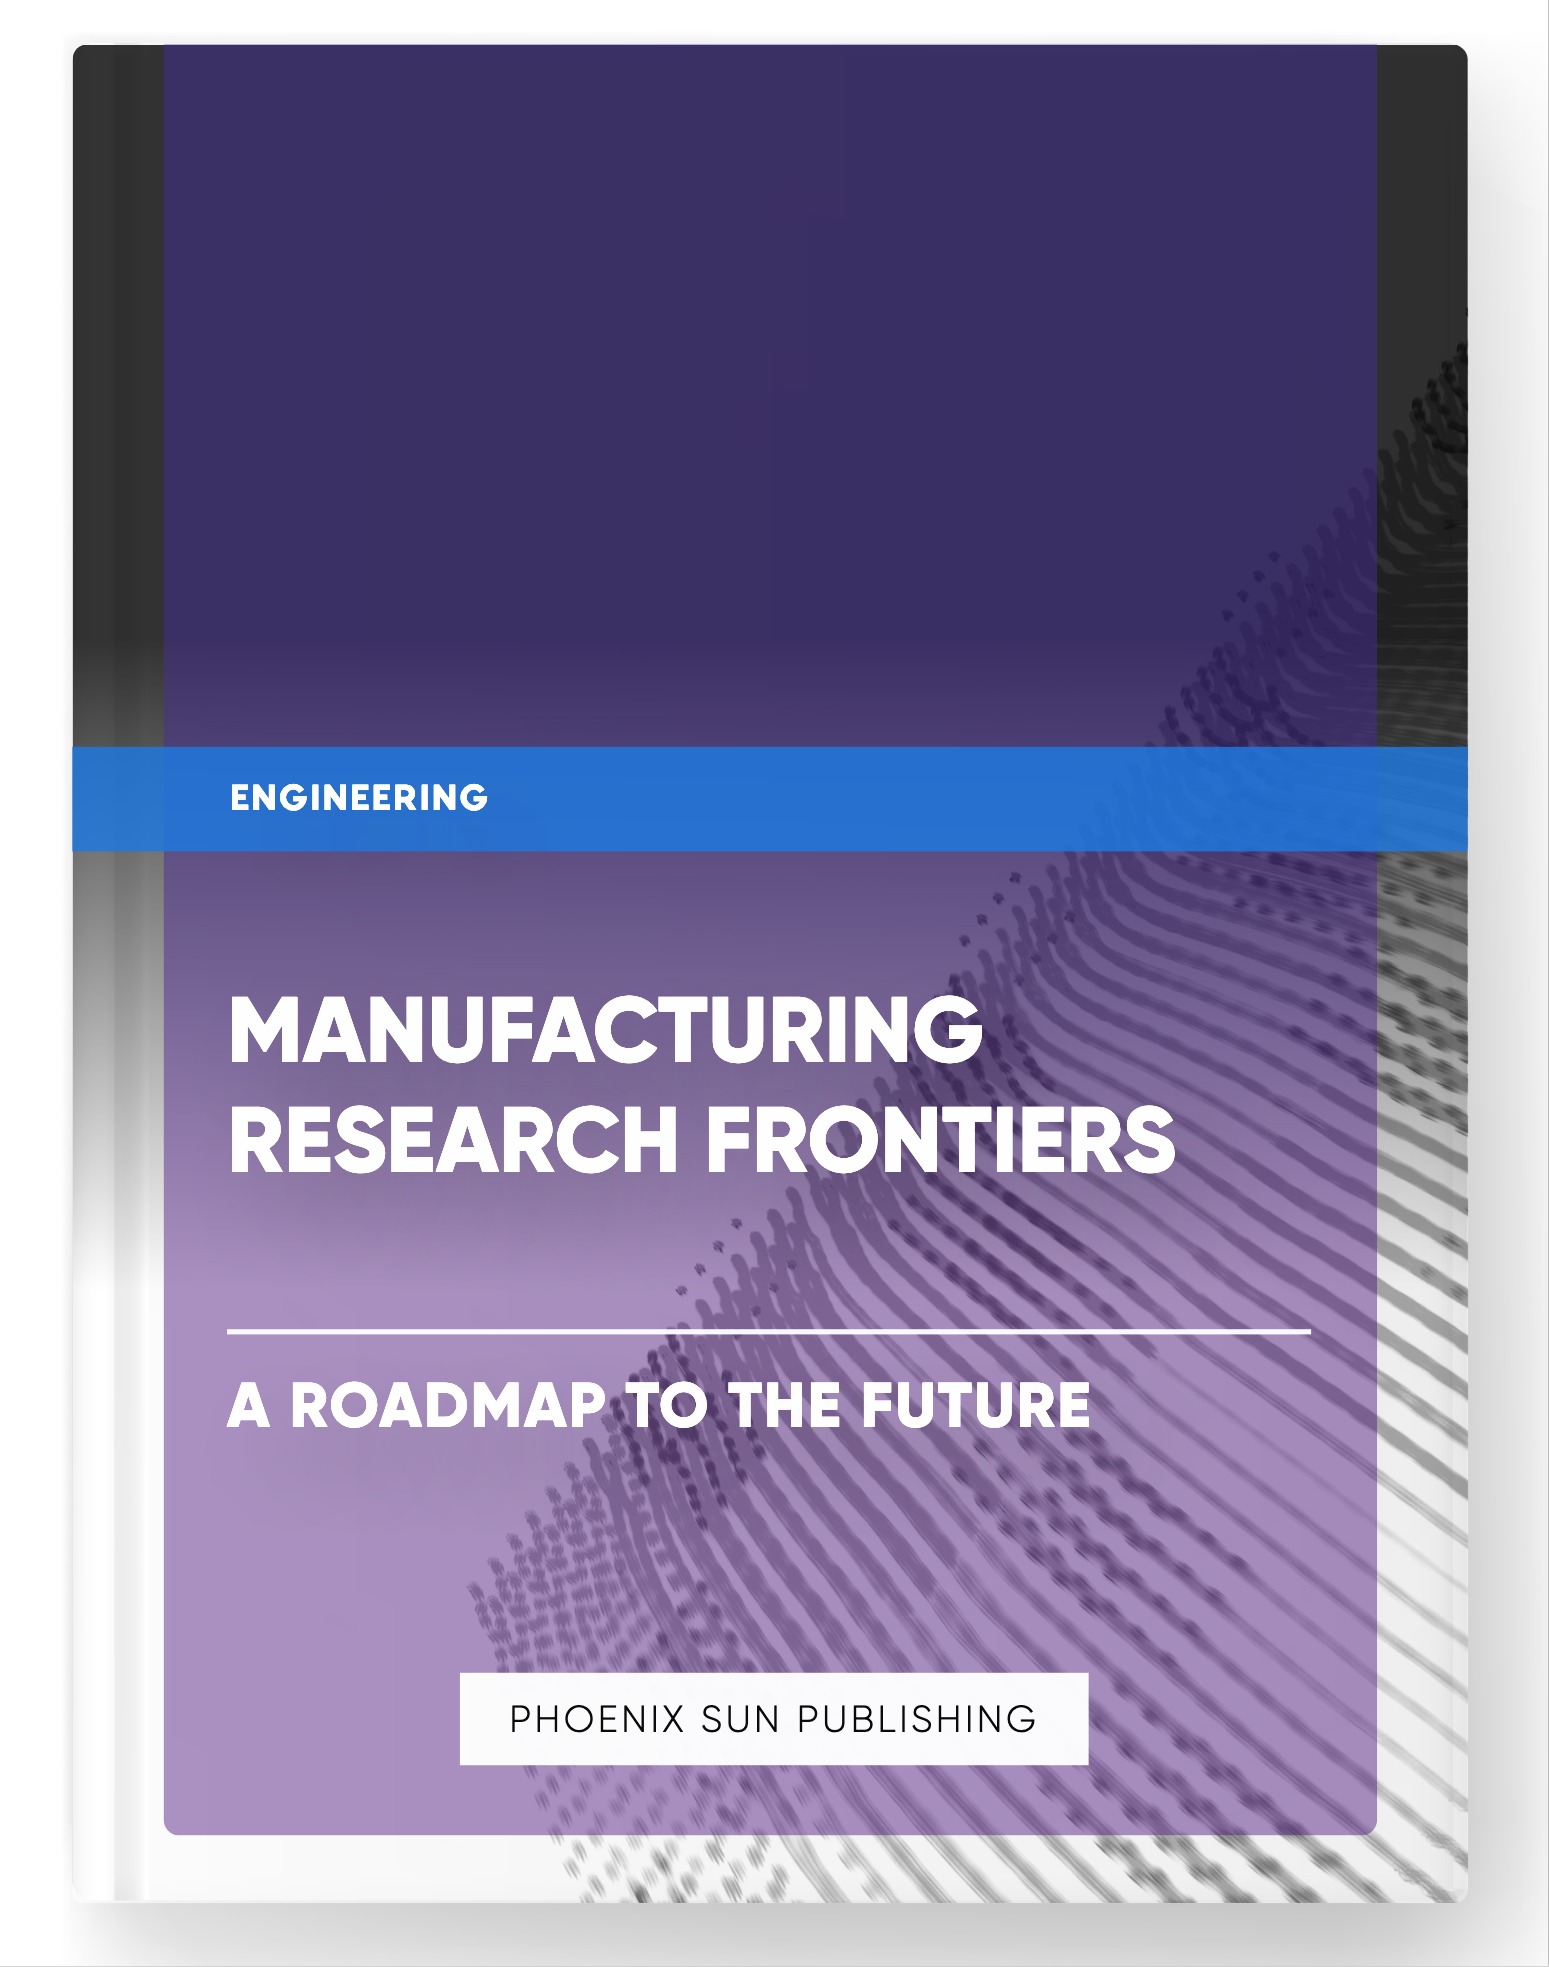 Manufacturing Research Frontiers – A Roadmap to the Future